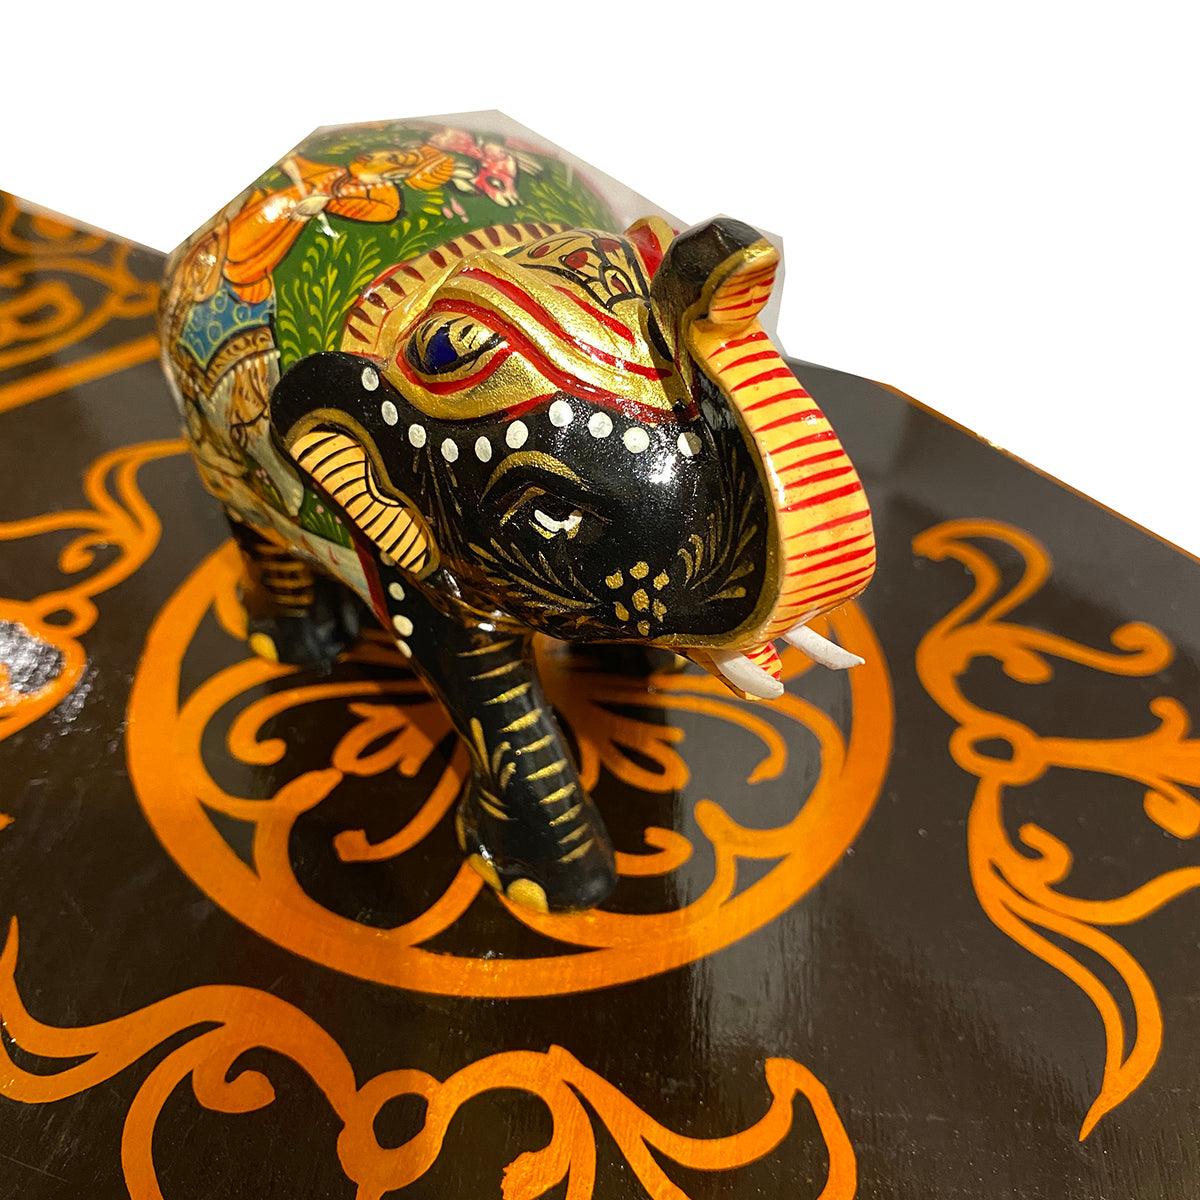 Painted Wooden Elephant - Vintage India NYC